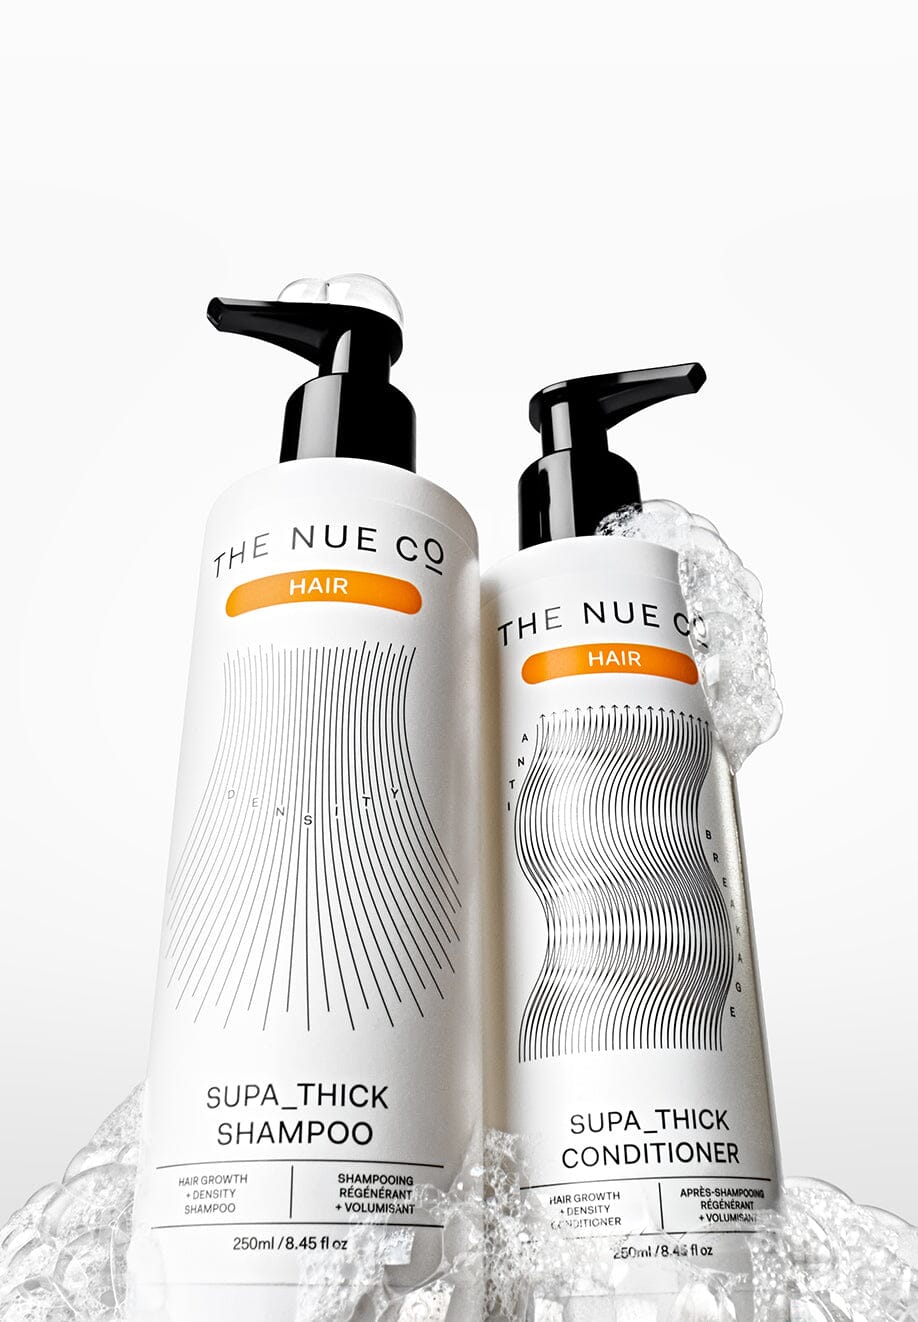 SUPA_THICK SHAMPOO + CONDITIONER The Nue Co. UK 